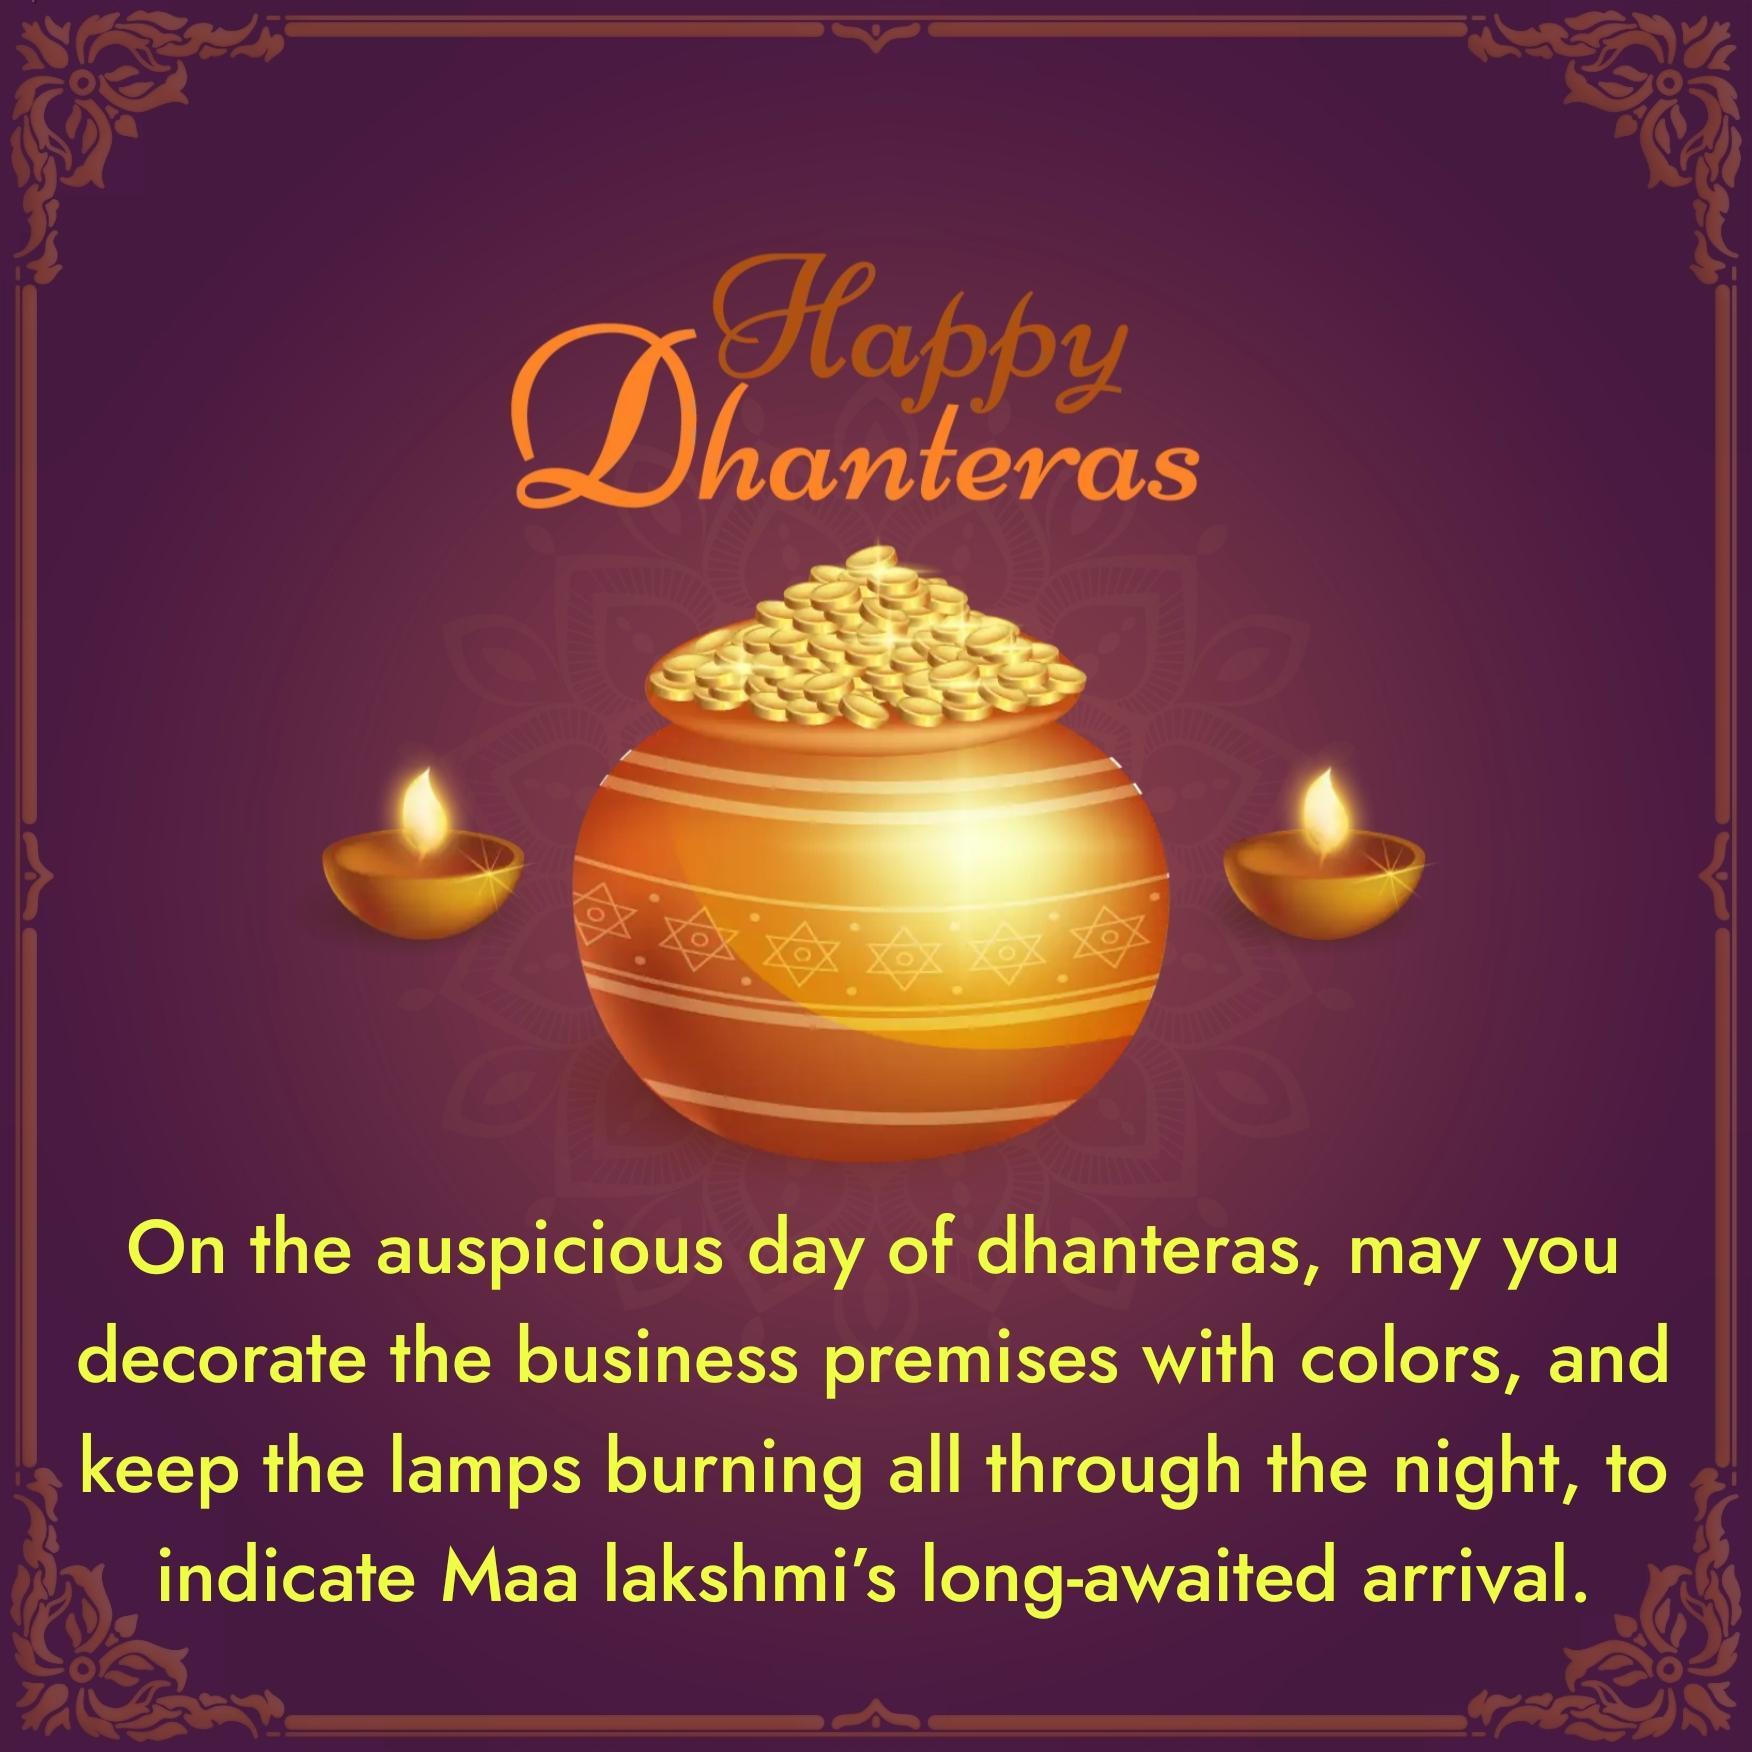 On the auspicious day of dhanteras may you decorate